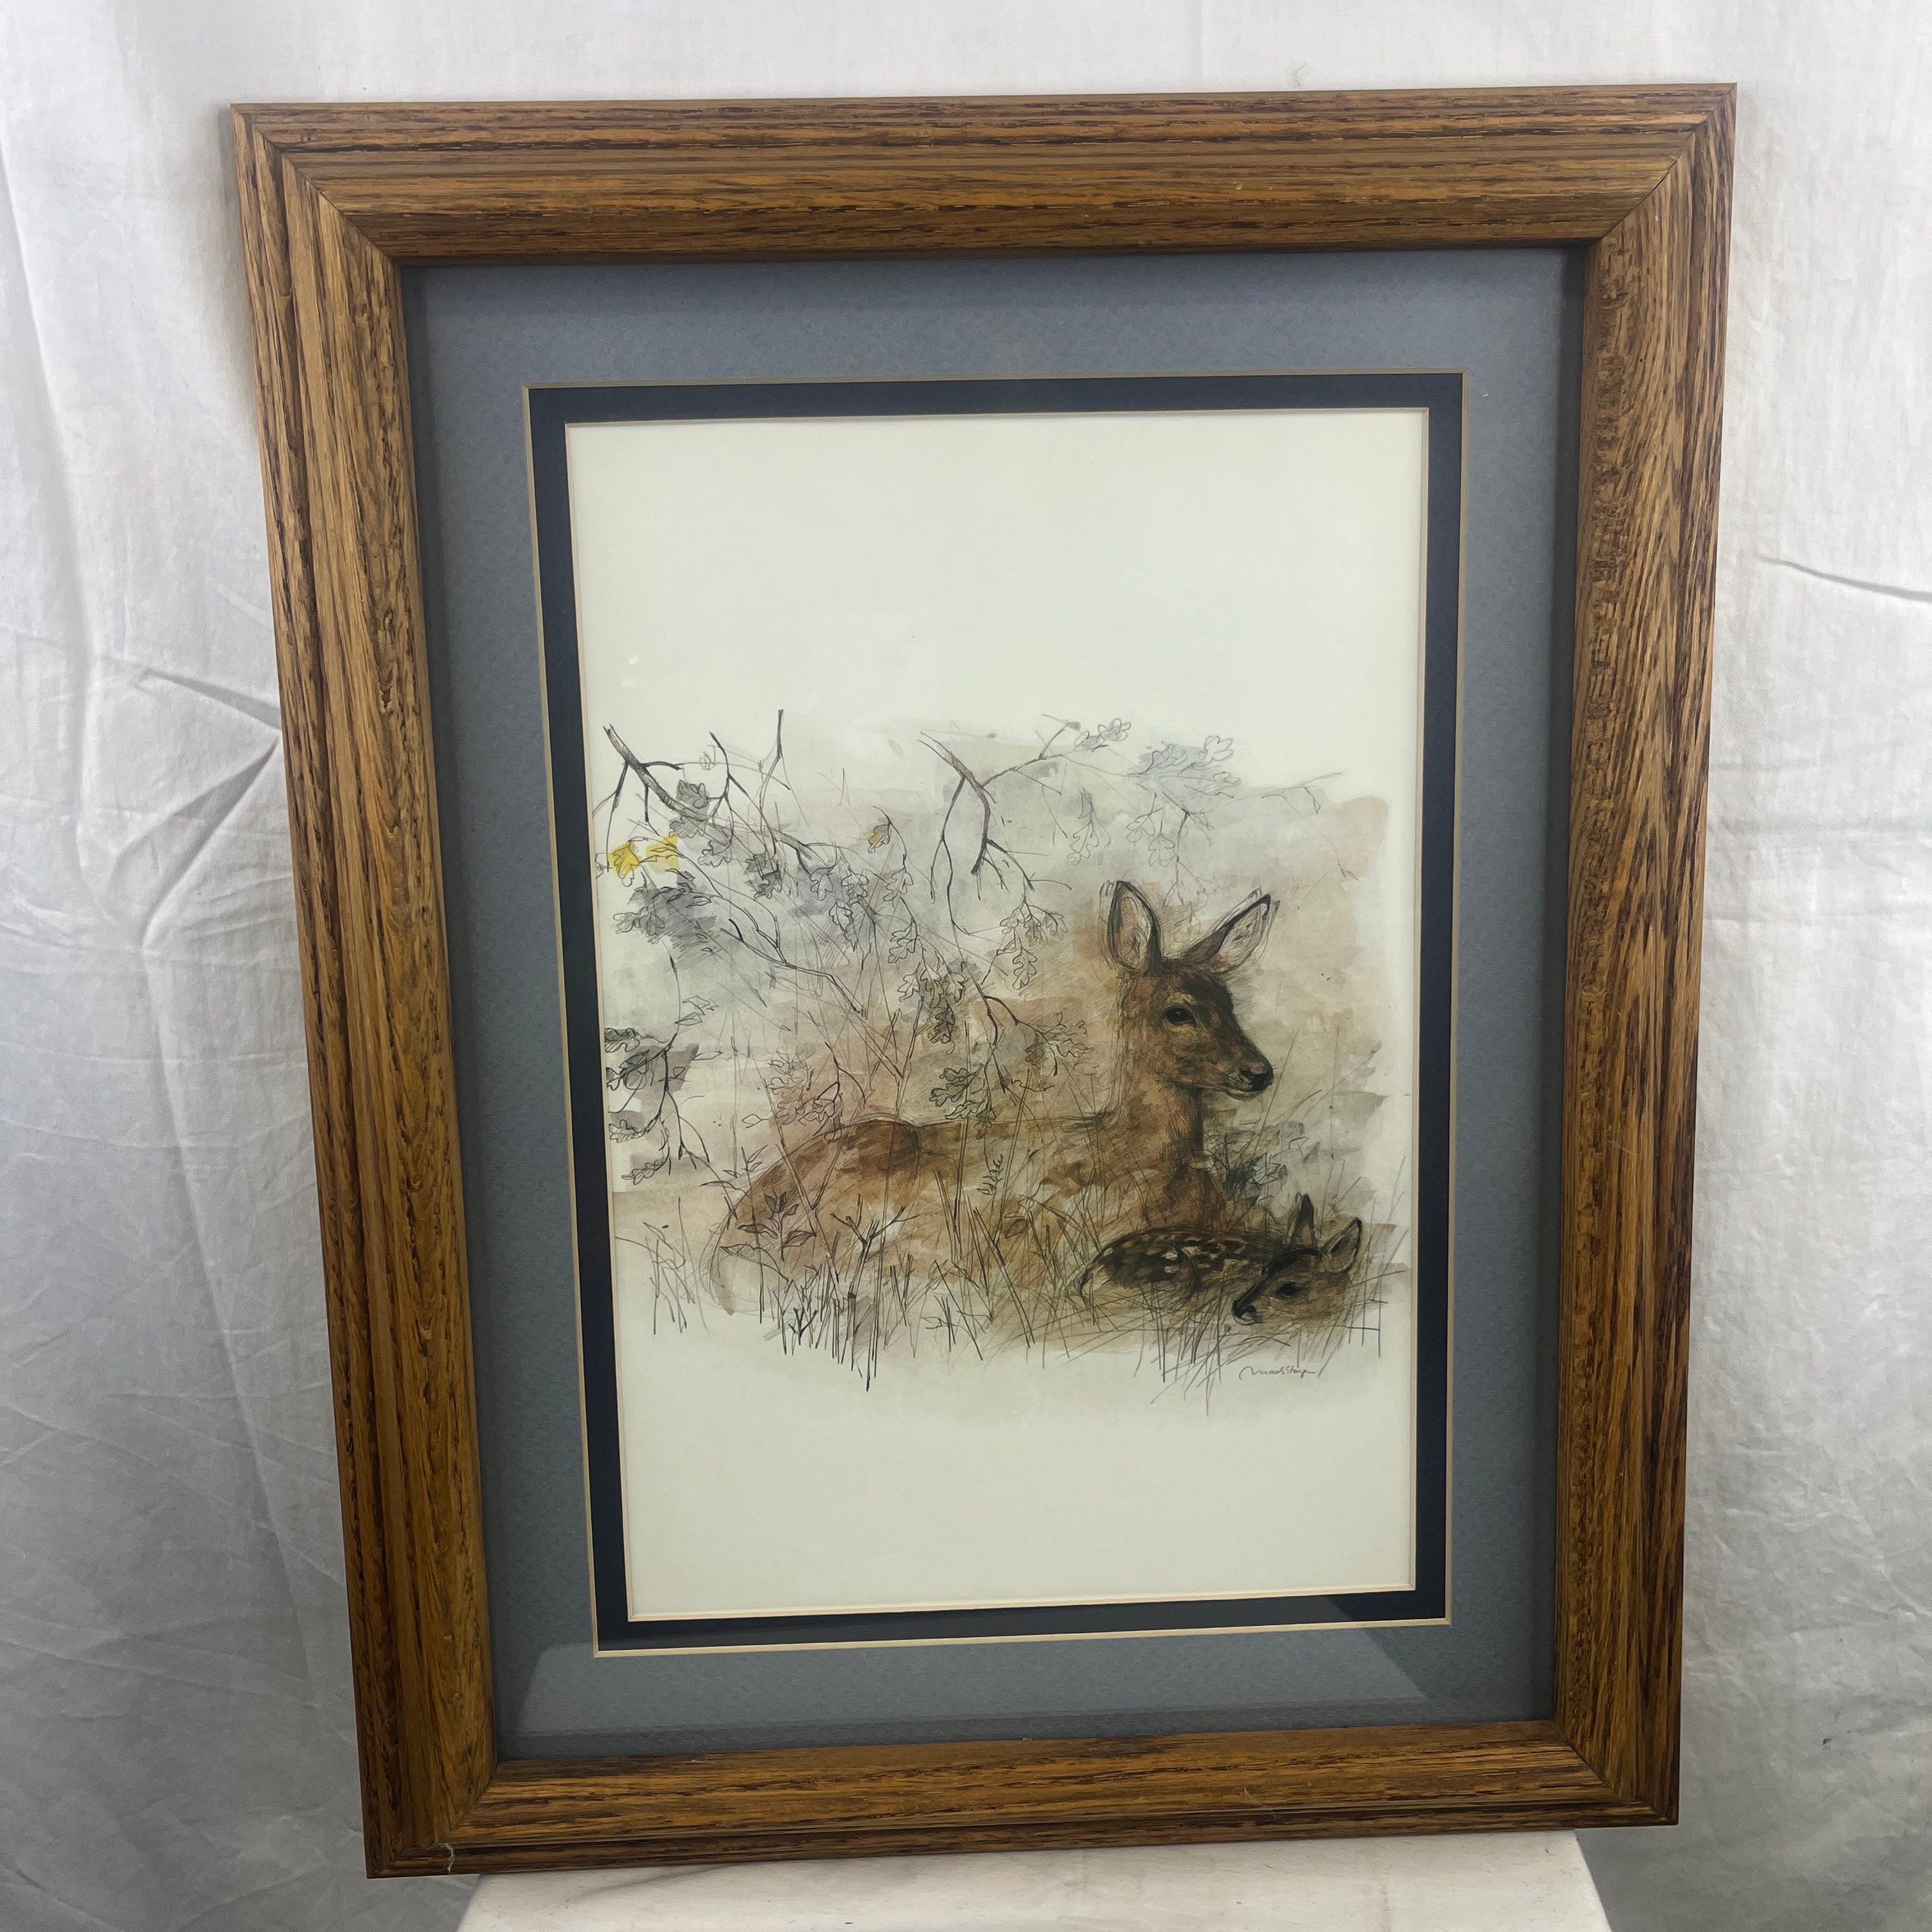 Doe and Fawn by Mads Stage Double Matted Pencil and Watercolor on Paper Signed Framed Print